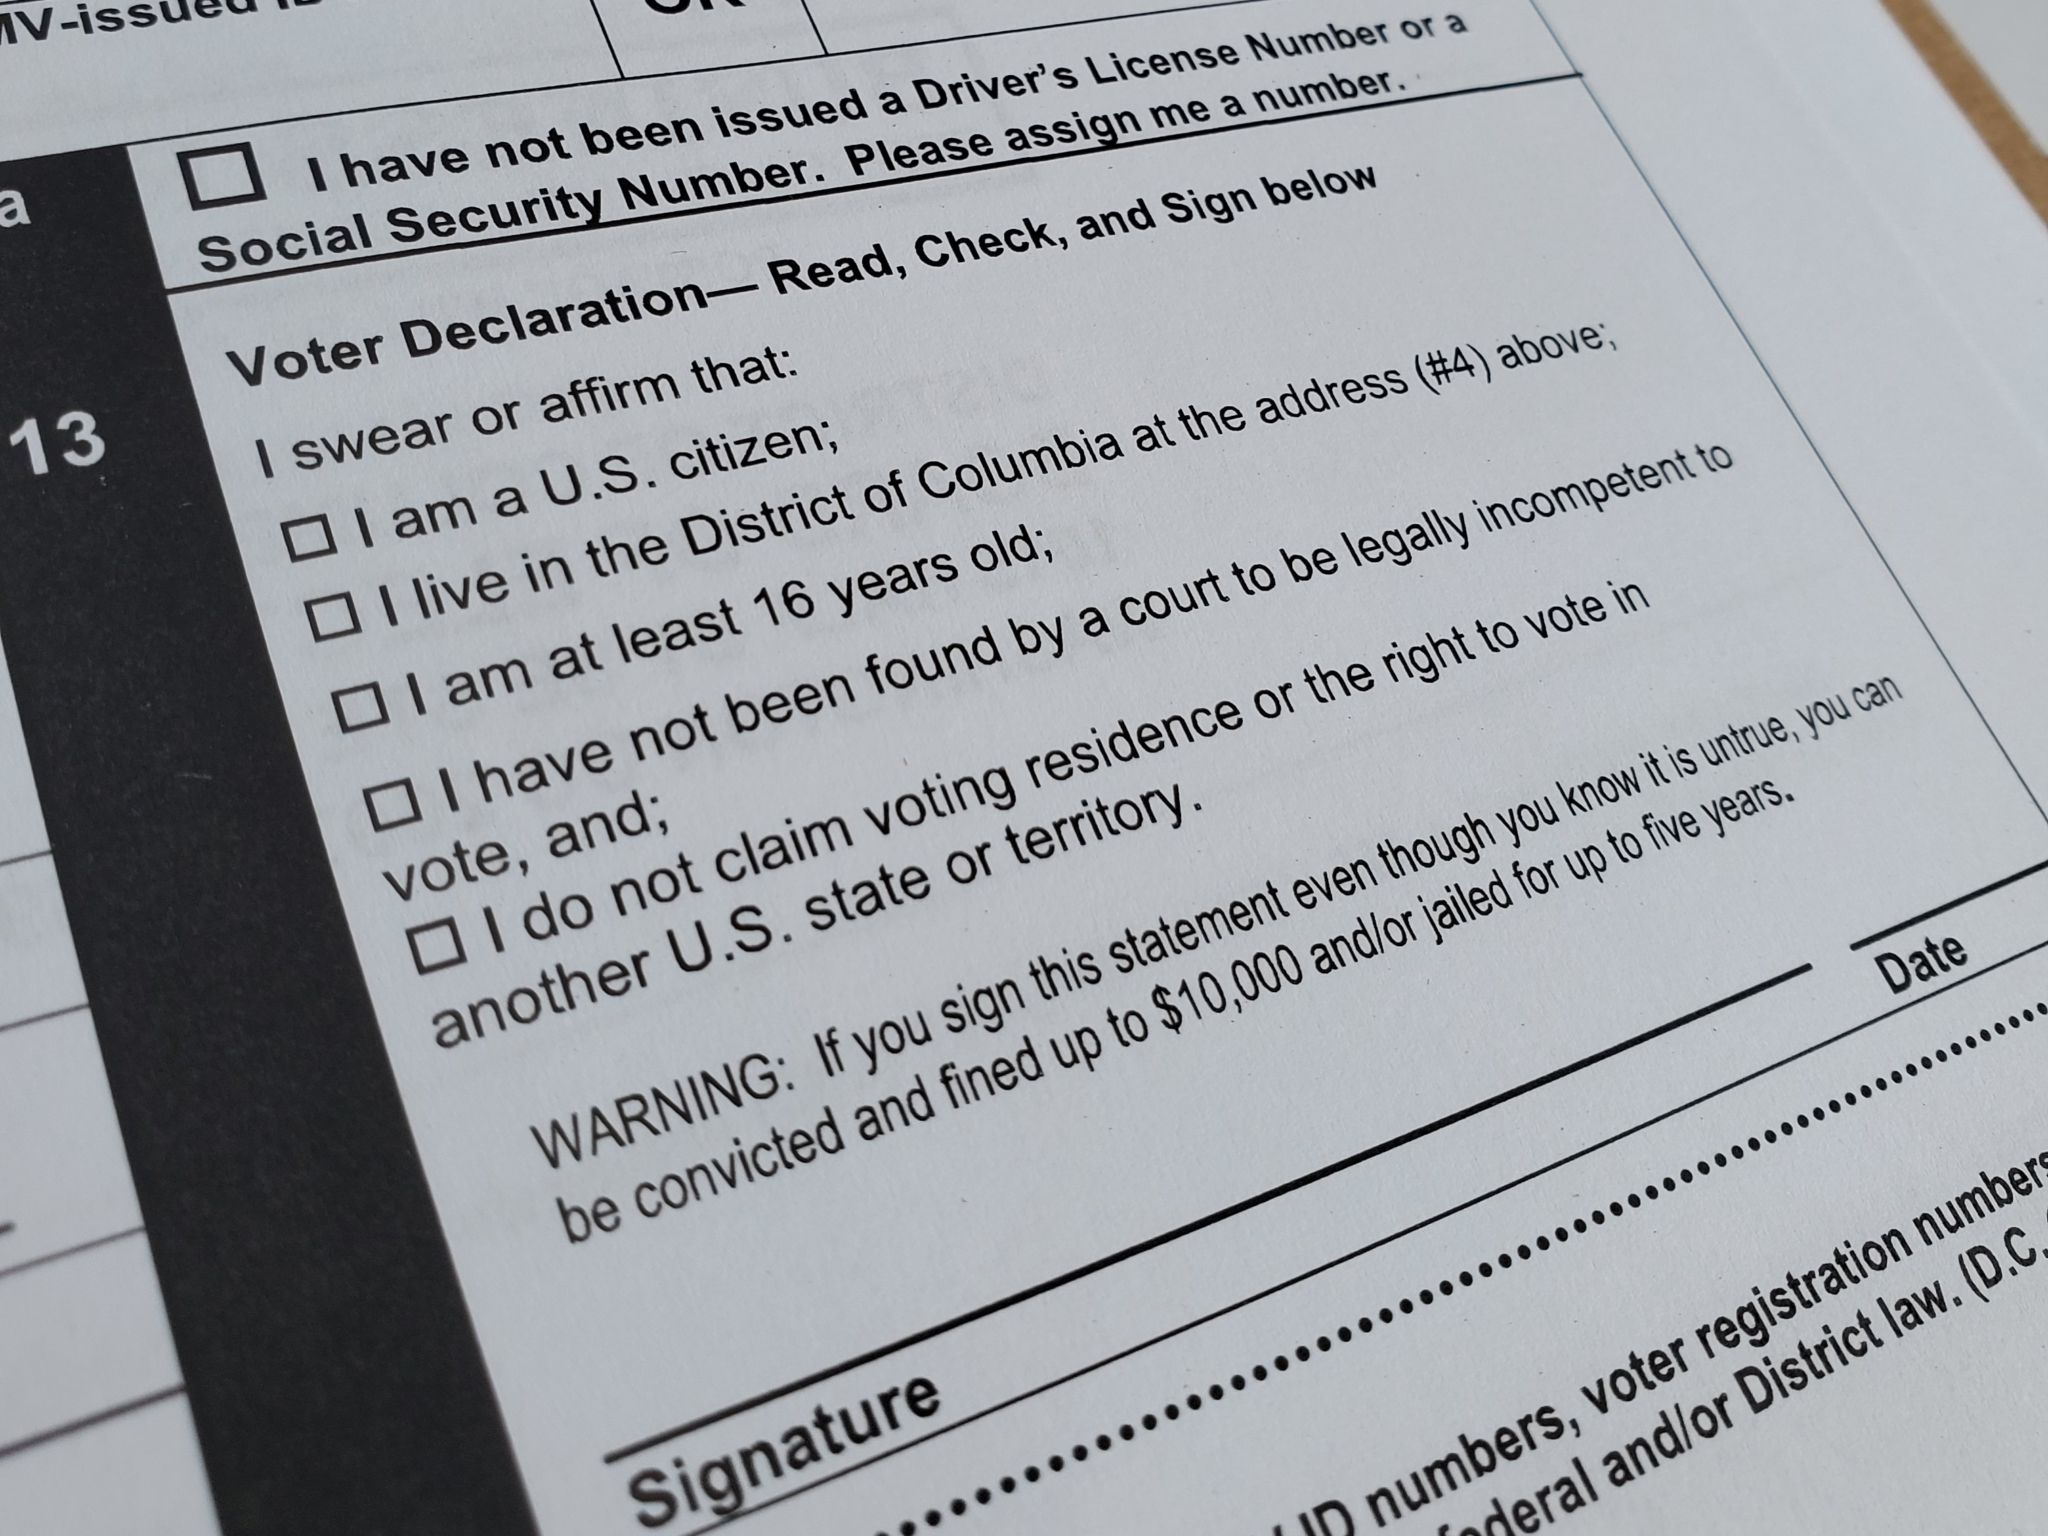 Photo of the eligibility questions on the D.C. voter registration form